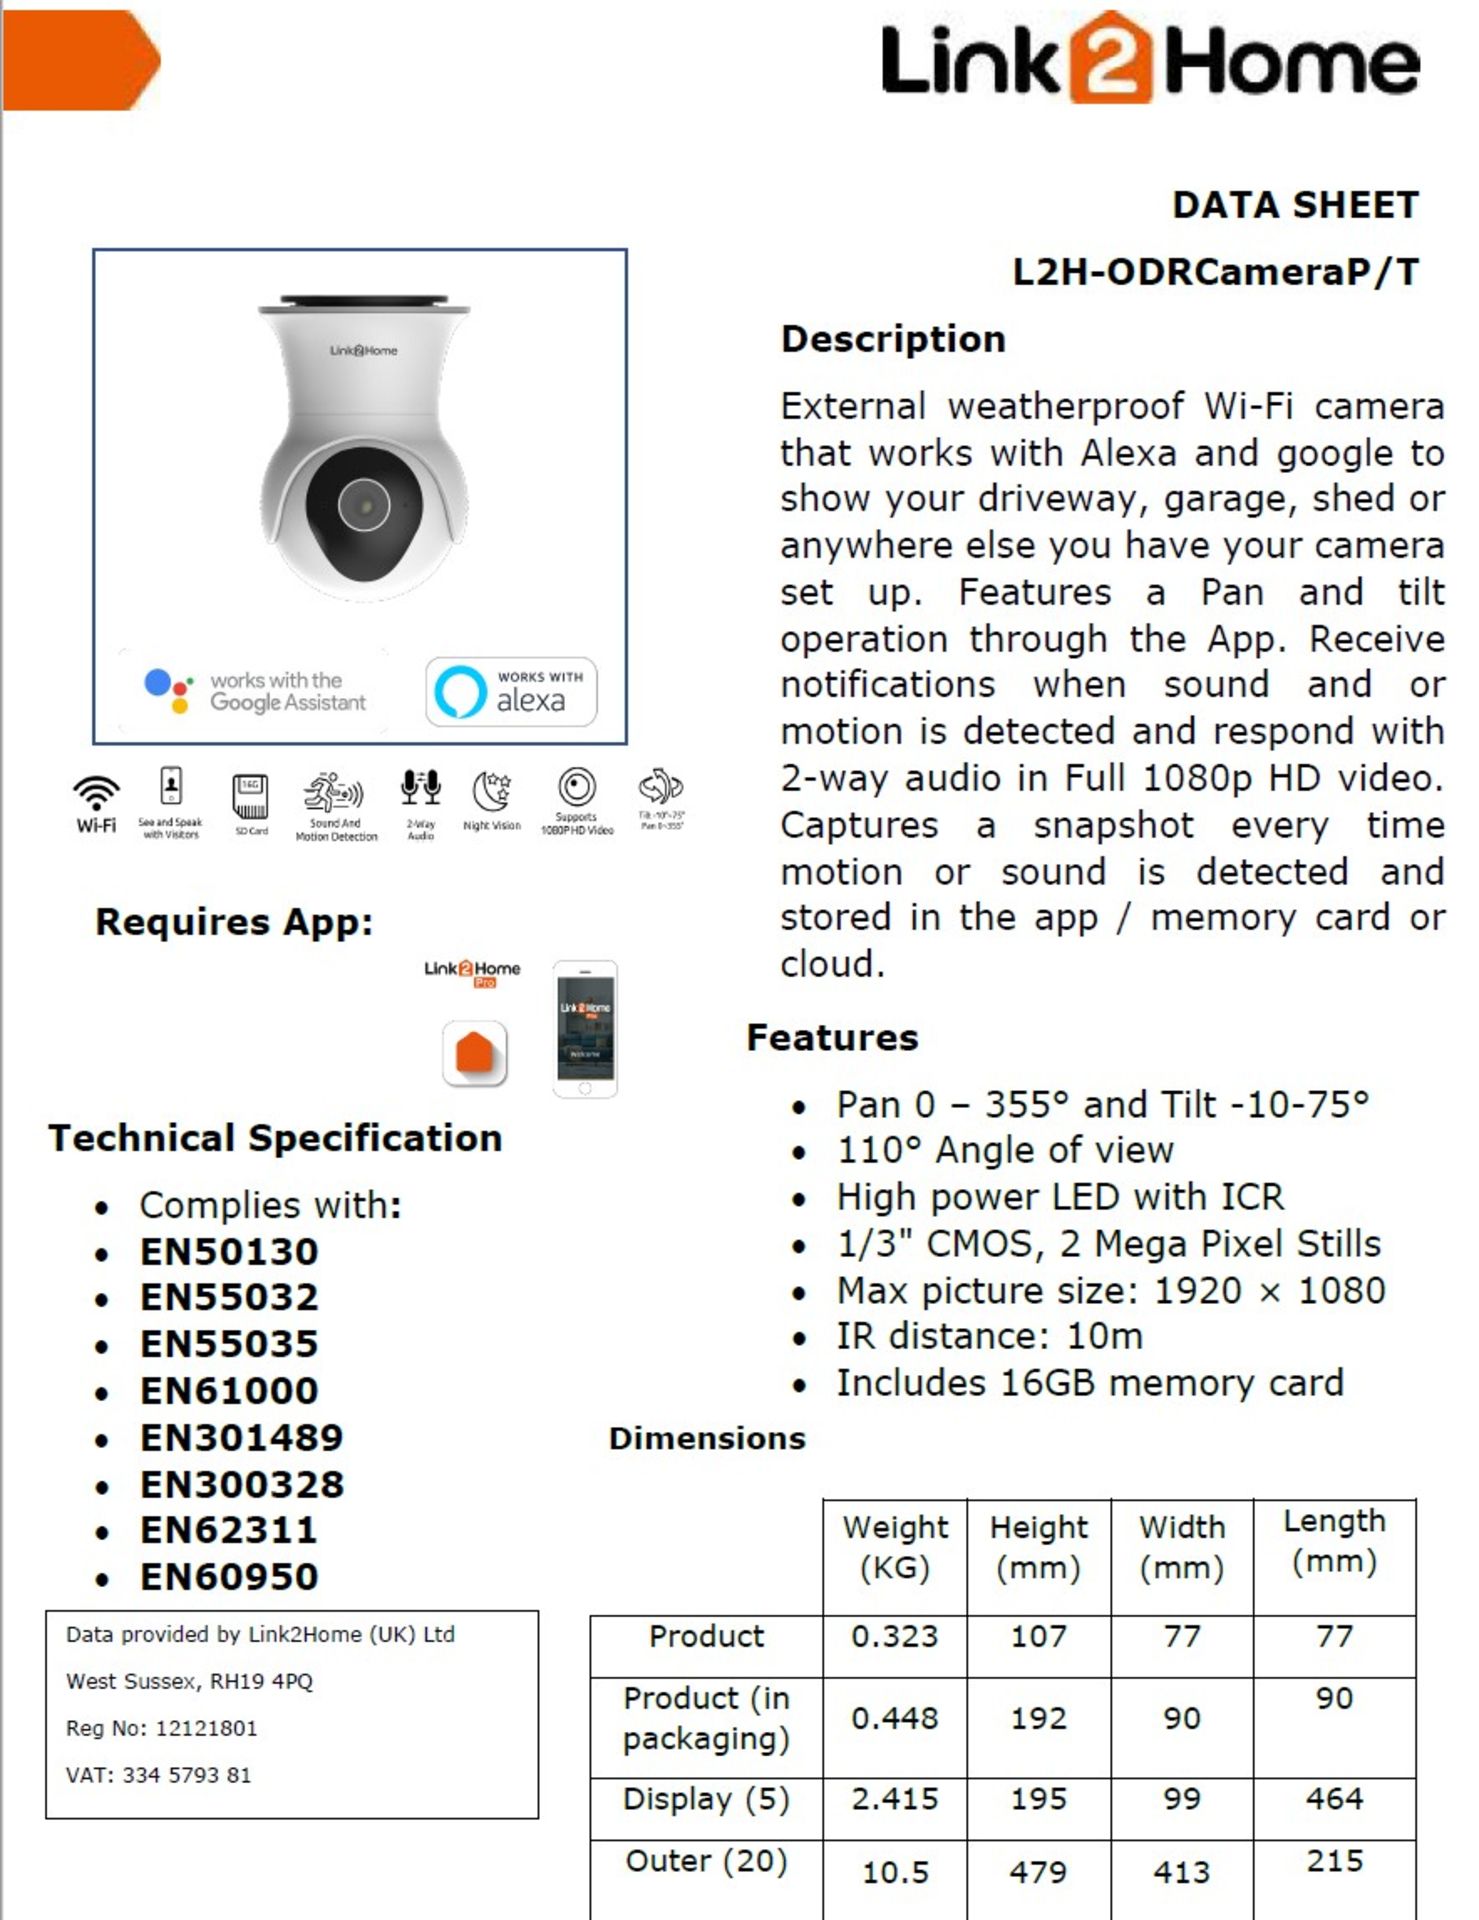 A Link2Home 'L2H-ODRCameraP/T' External Weatherproof Wi-Fi Camera with Pan and Tilt Operation - New, - Image 9 of 14